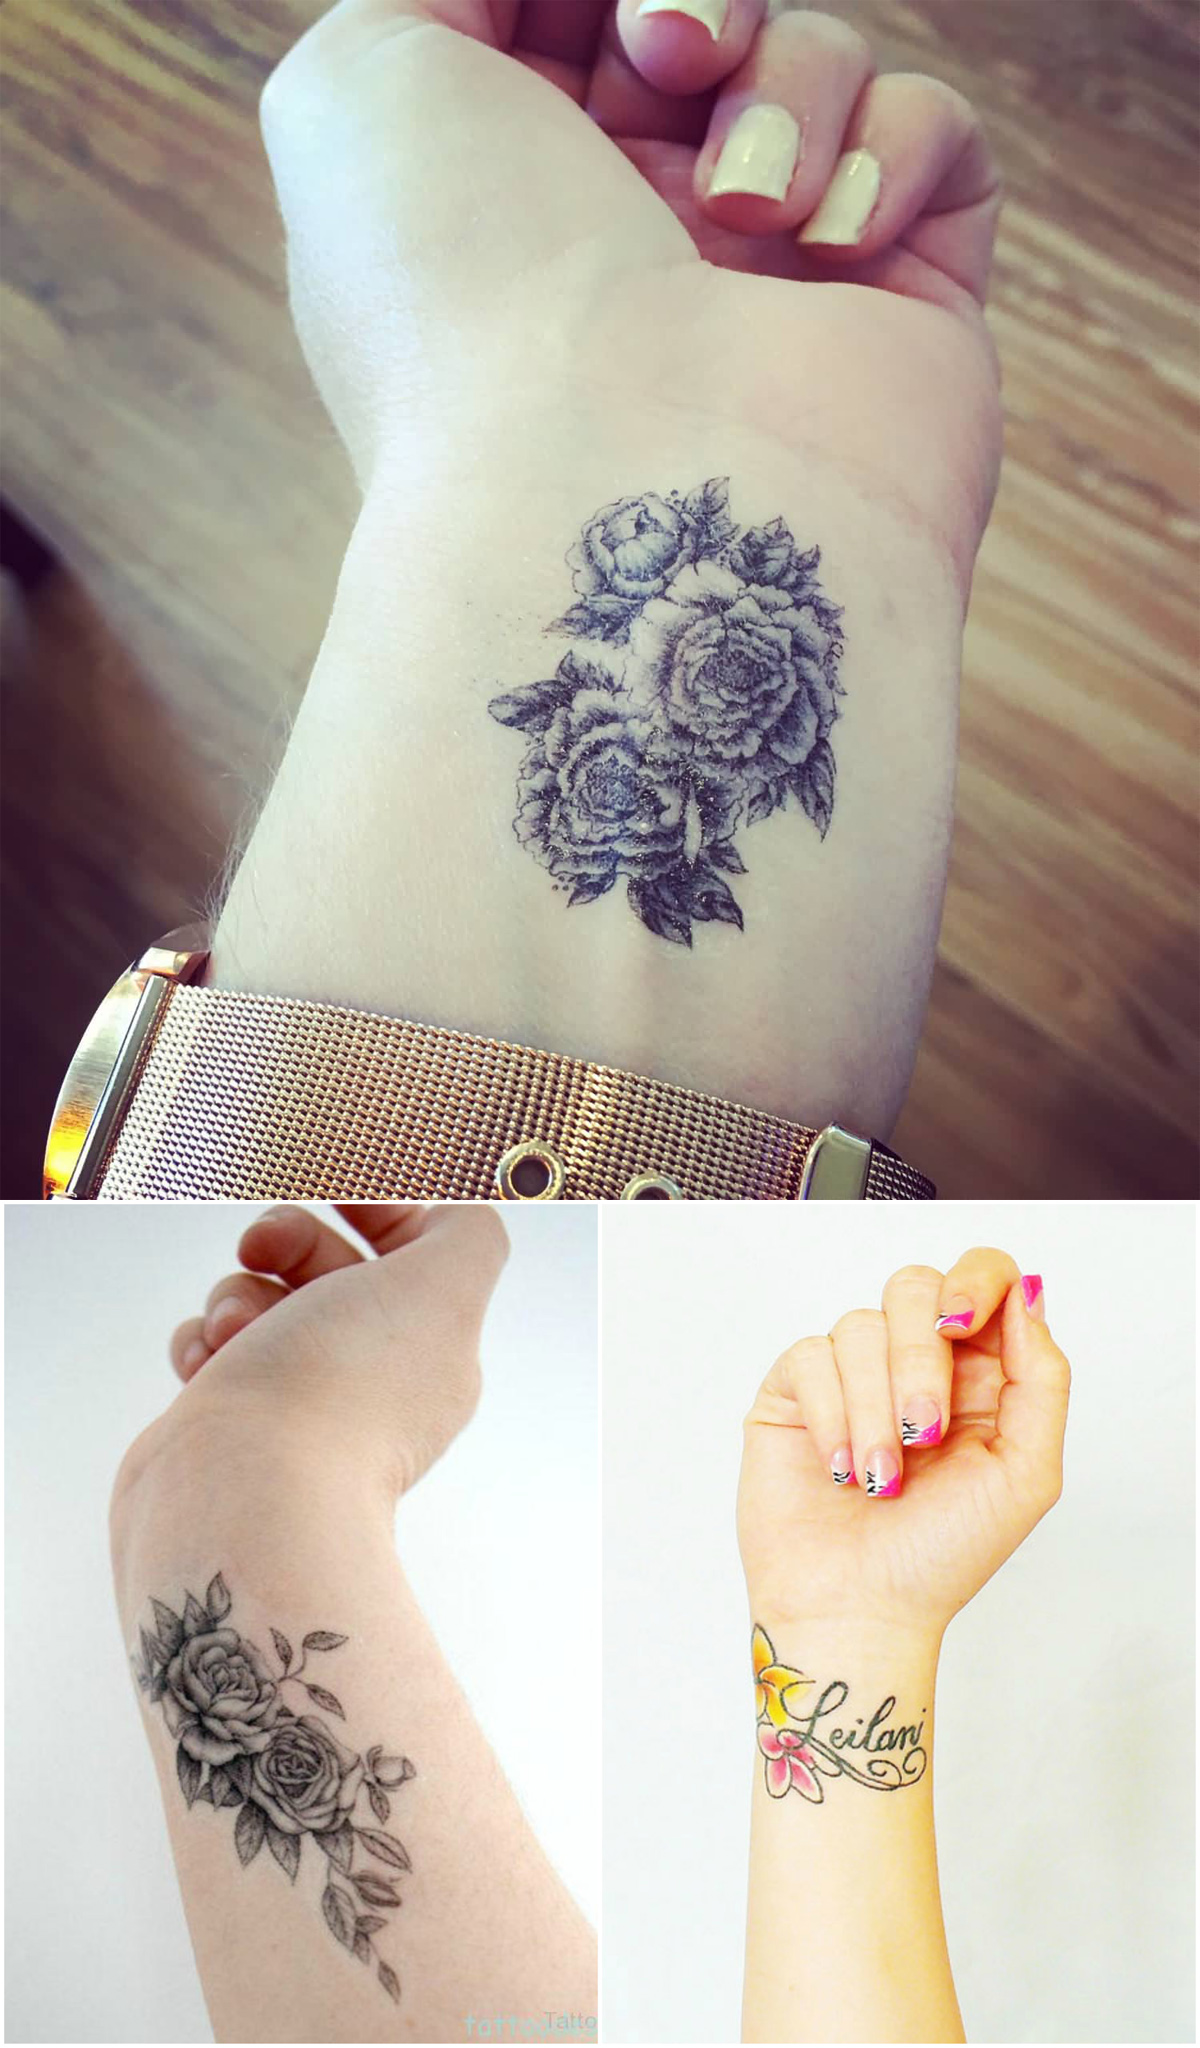 Highly Cute and Sensational Wrist Tattoo Designs - Top Beauty Magazines